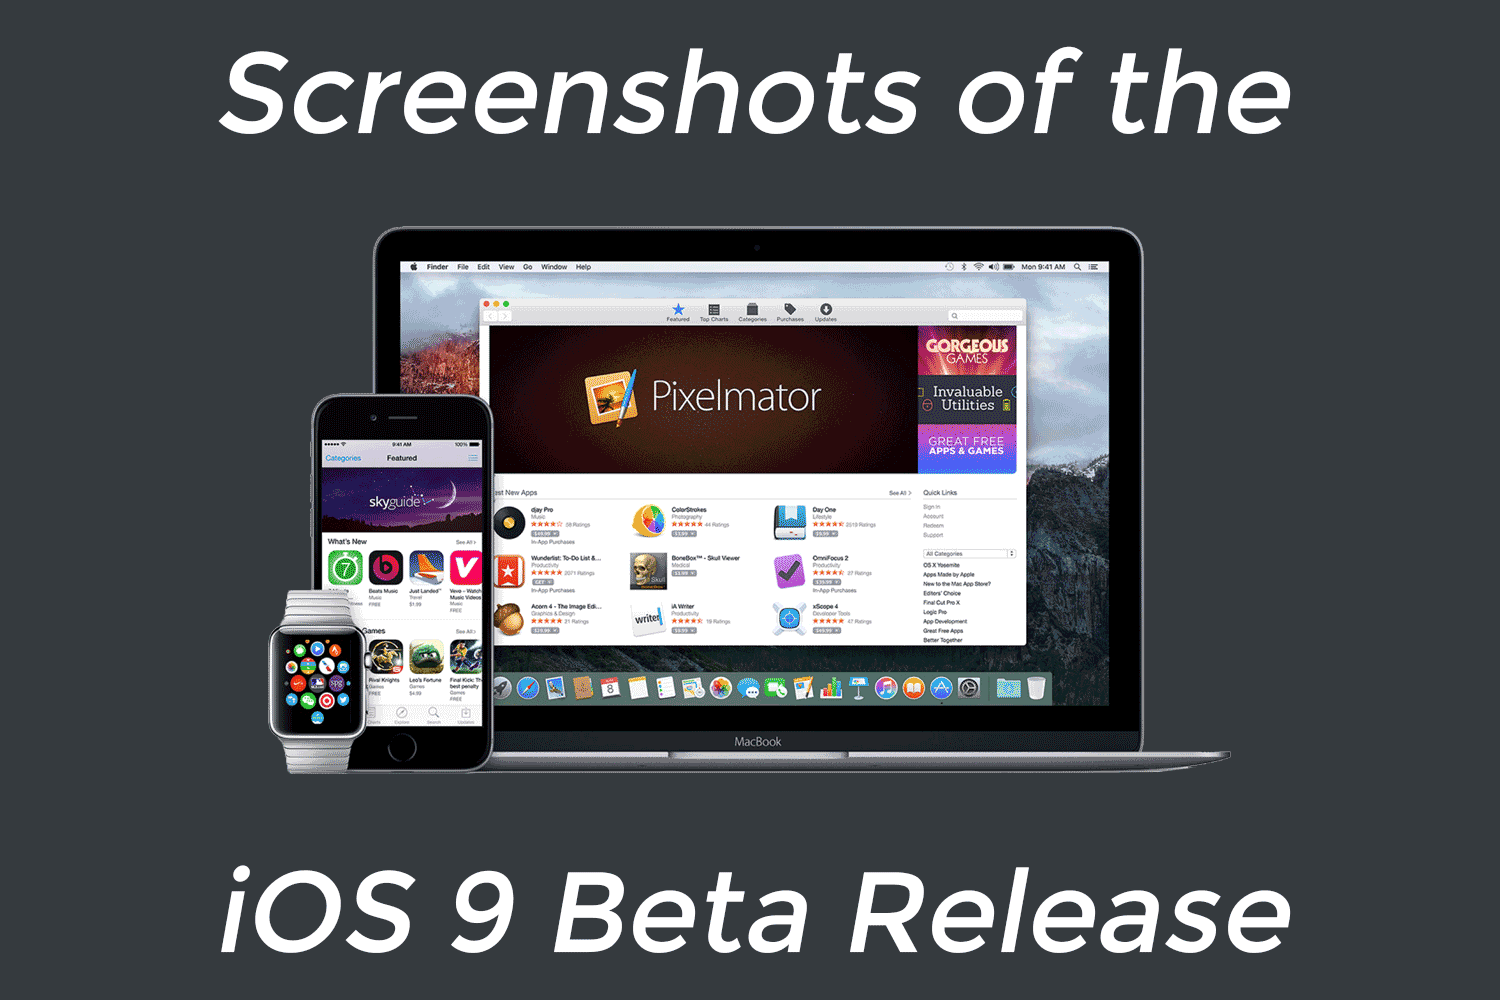 A first look at iOS 9 Beta – Photos and Features